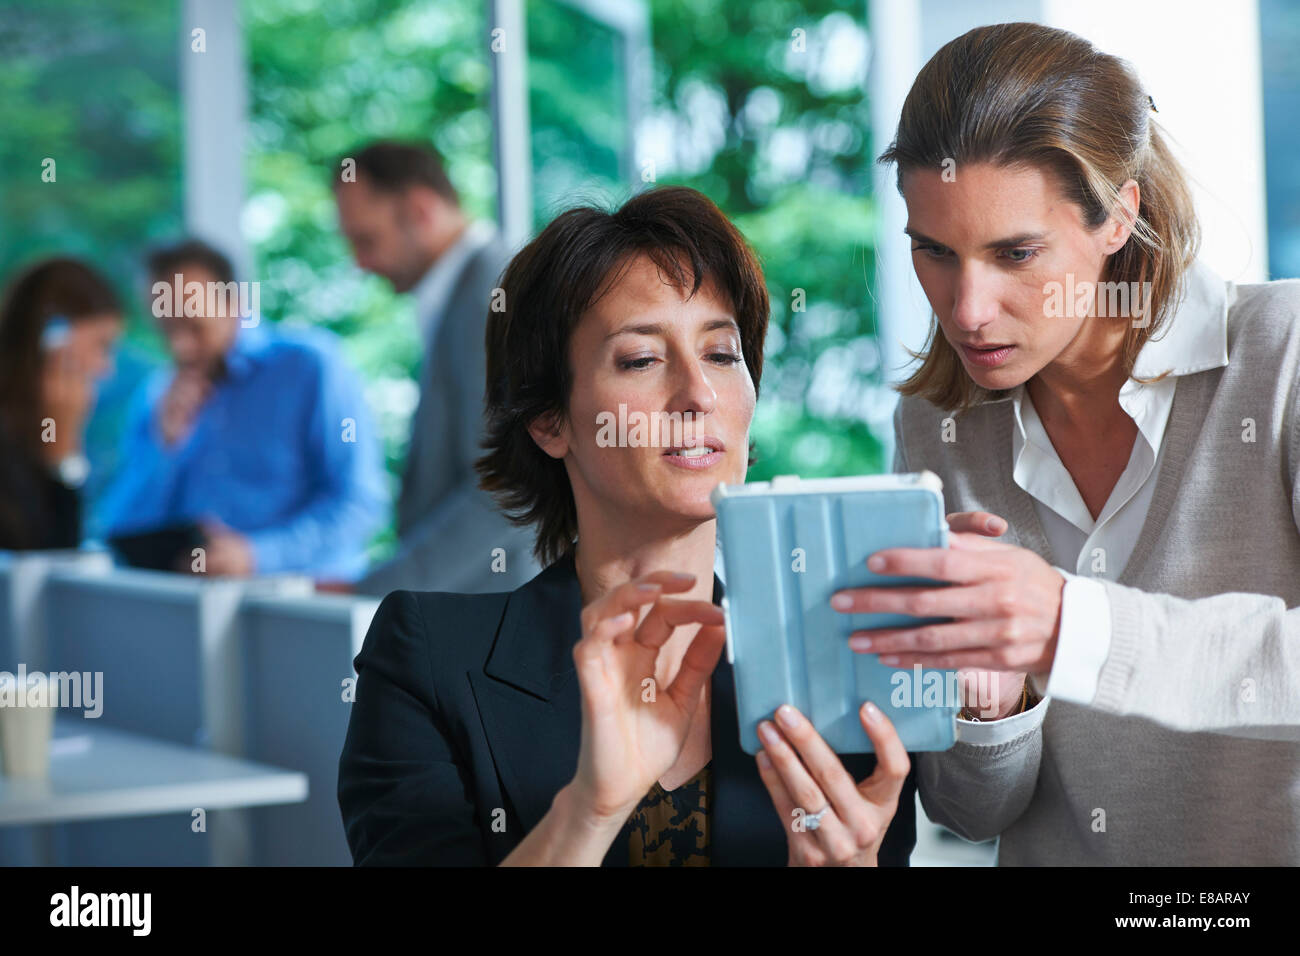 Two business women looking at digital tablet in office Stock Photo